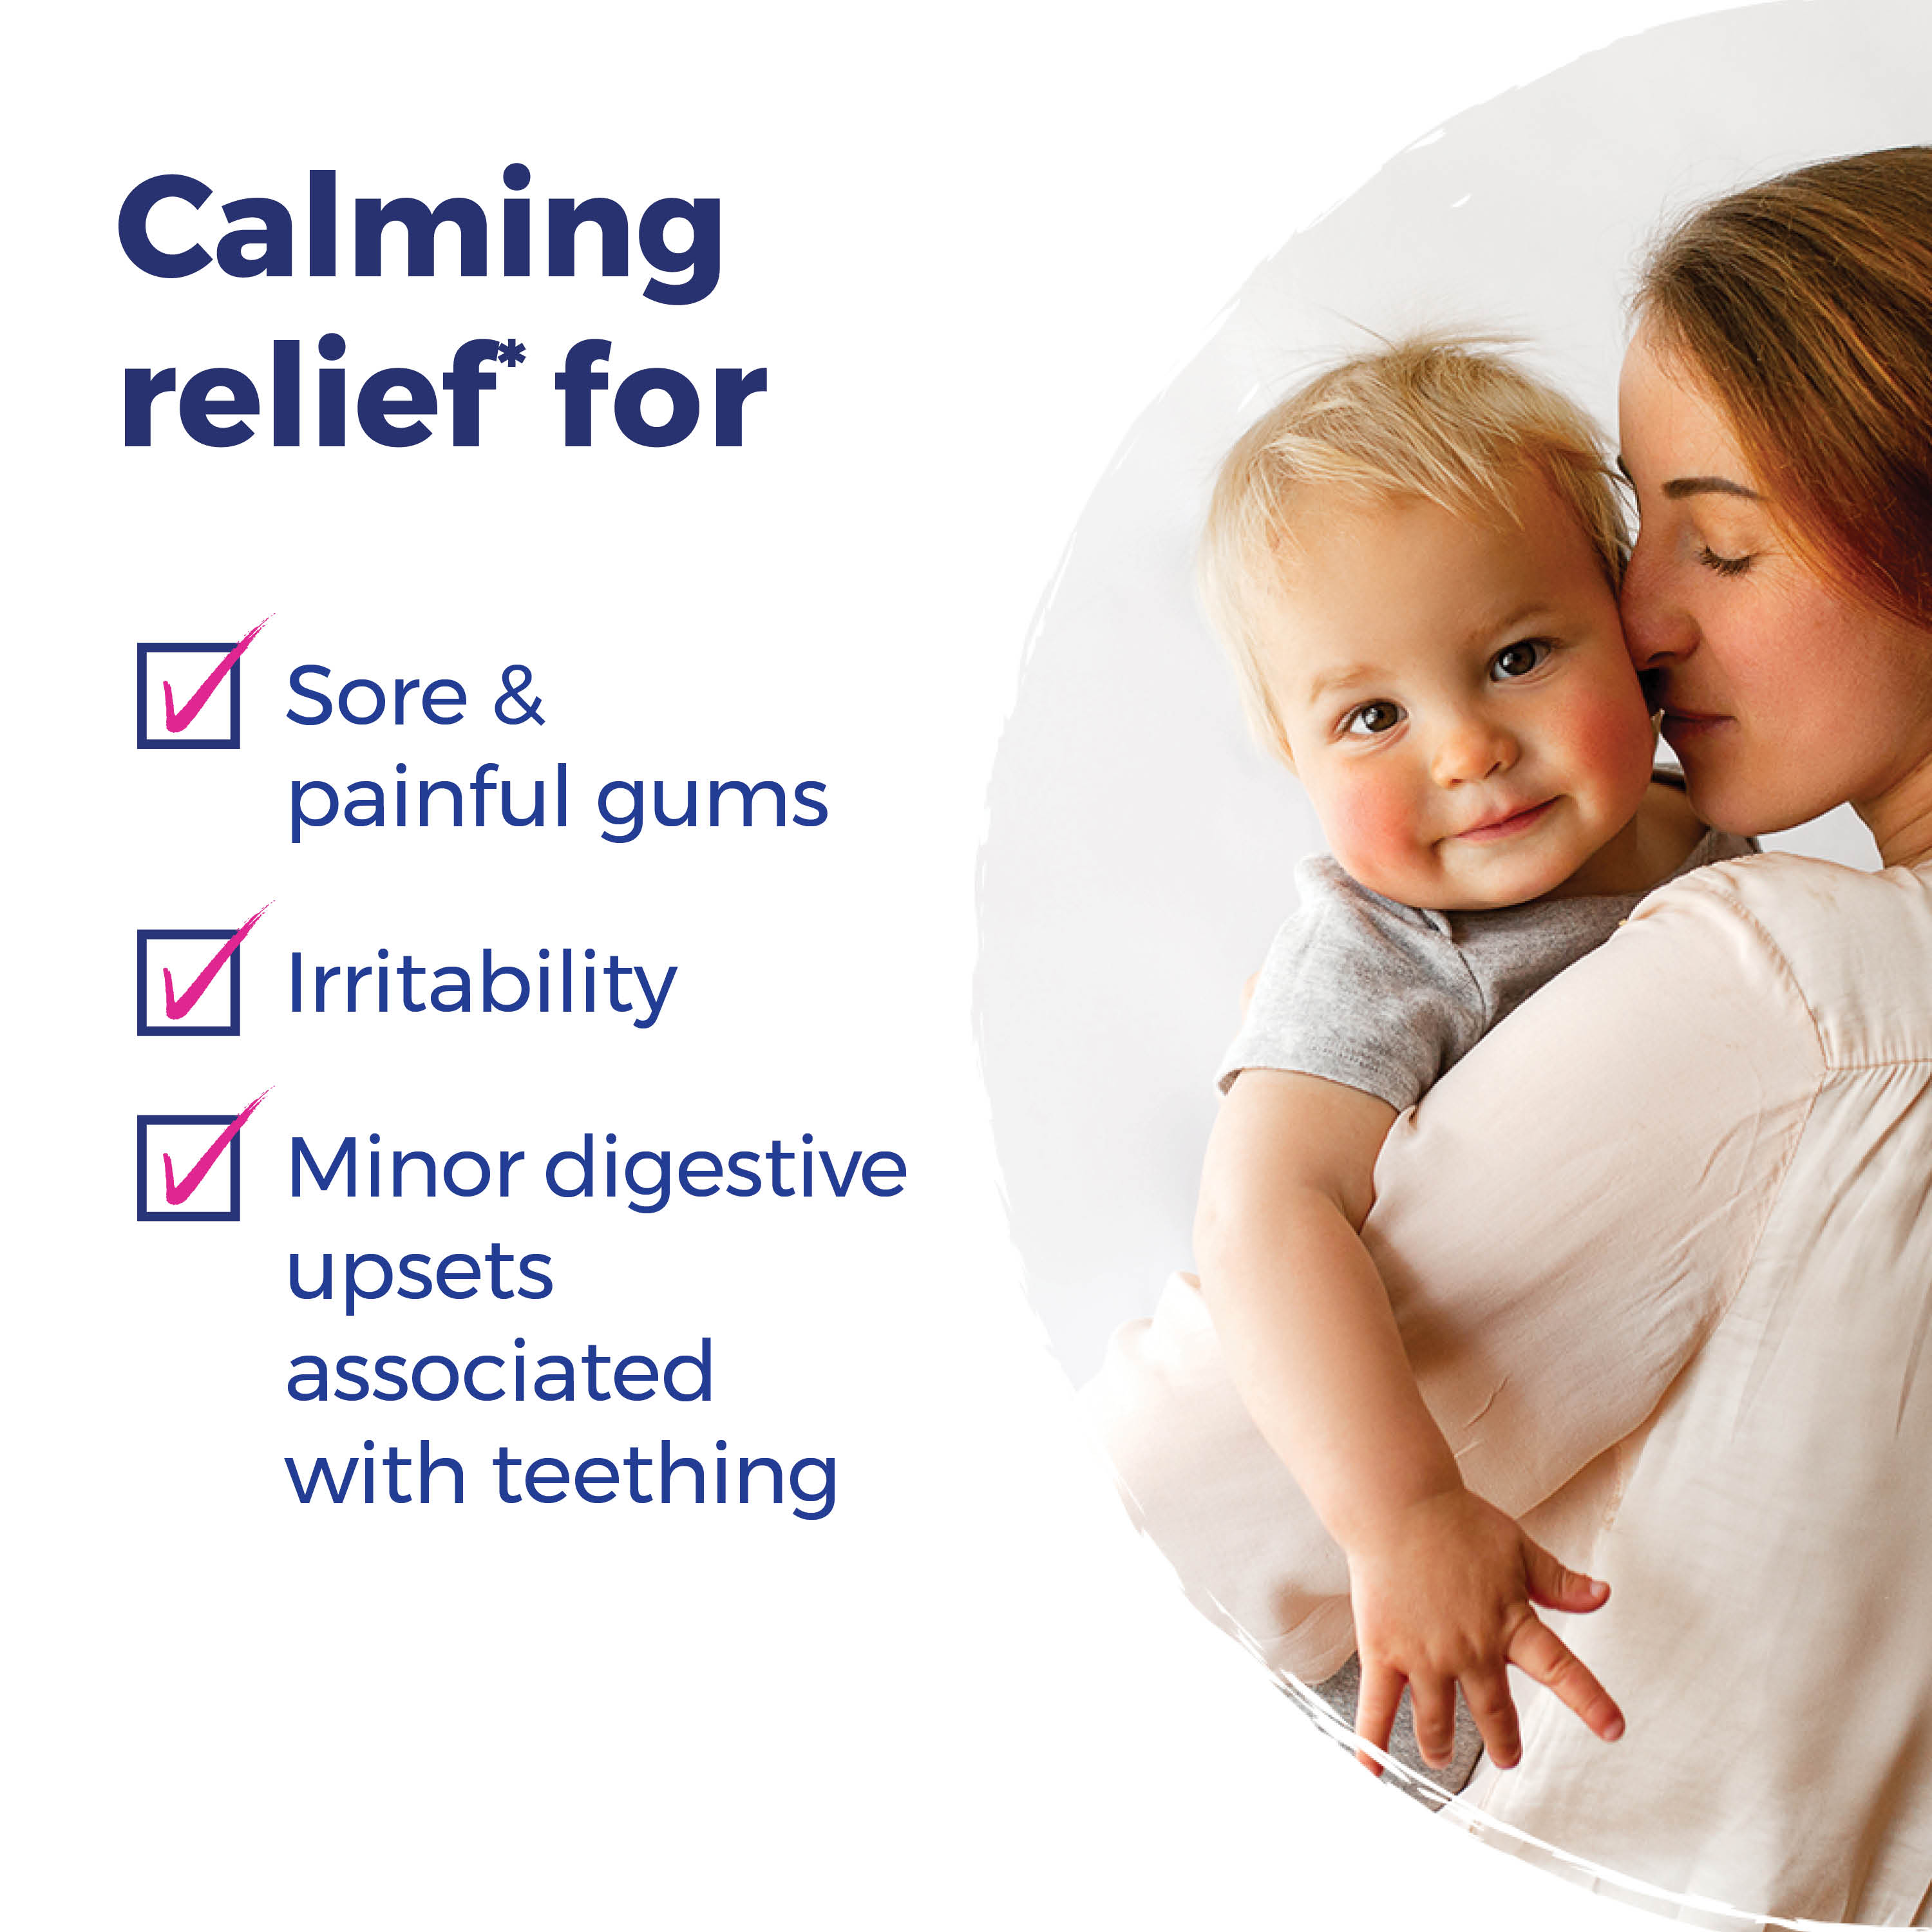 Boiron Camilia, Homeopathic Medicine for Teething Relief, 30 Single Liquid Doses - image 4 of 10